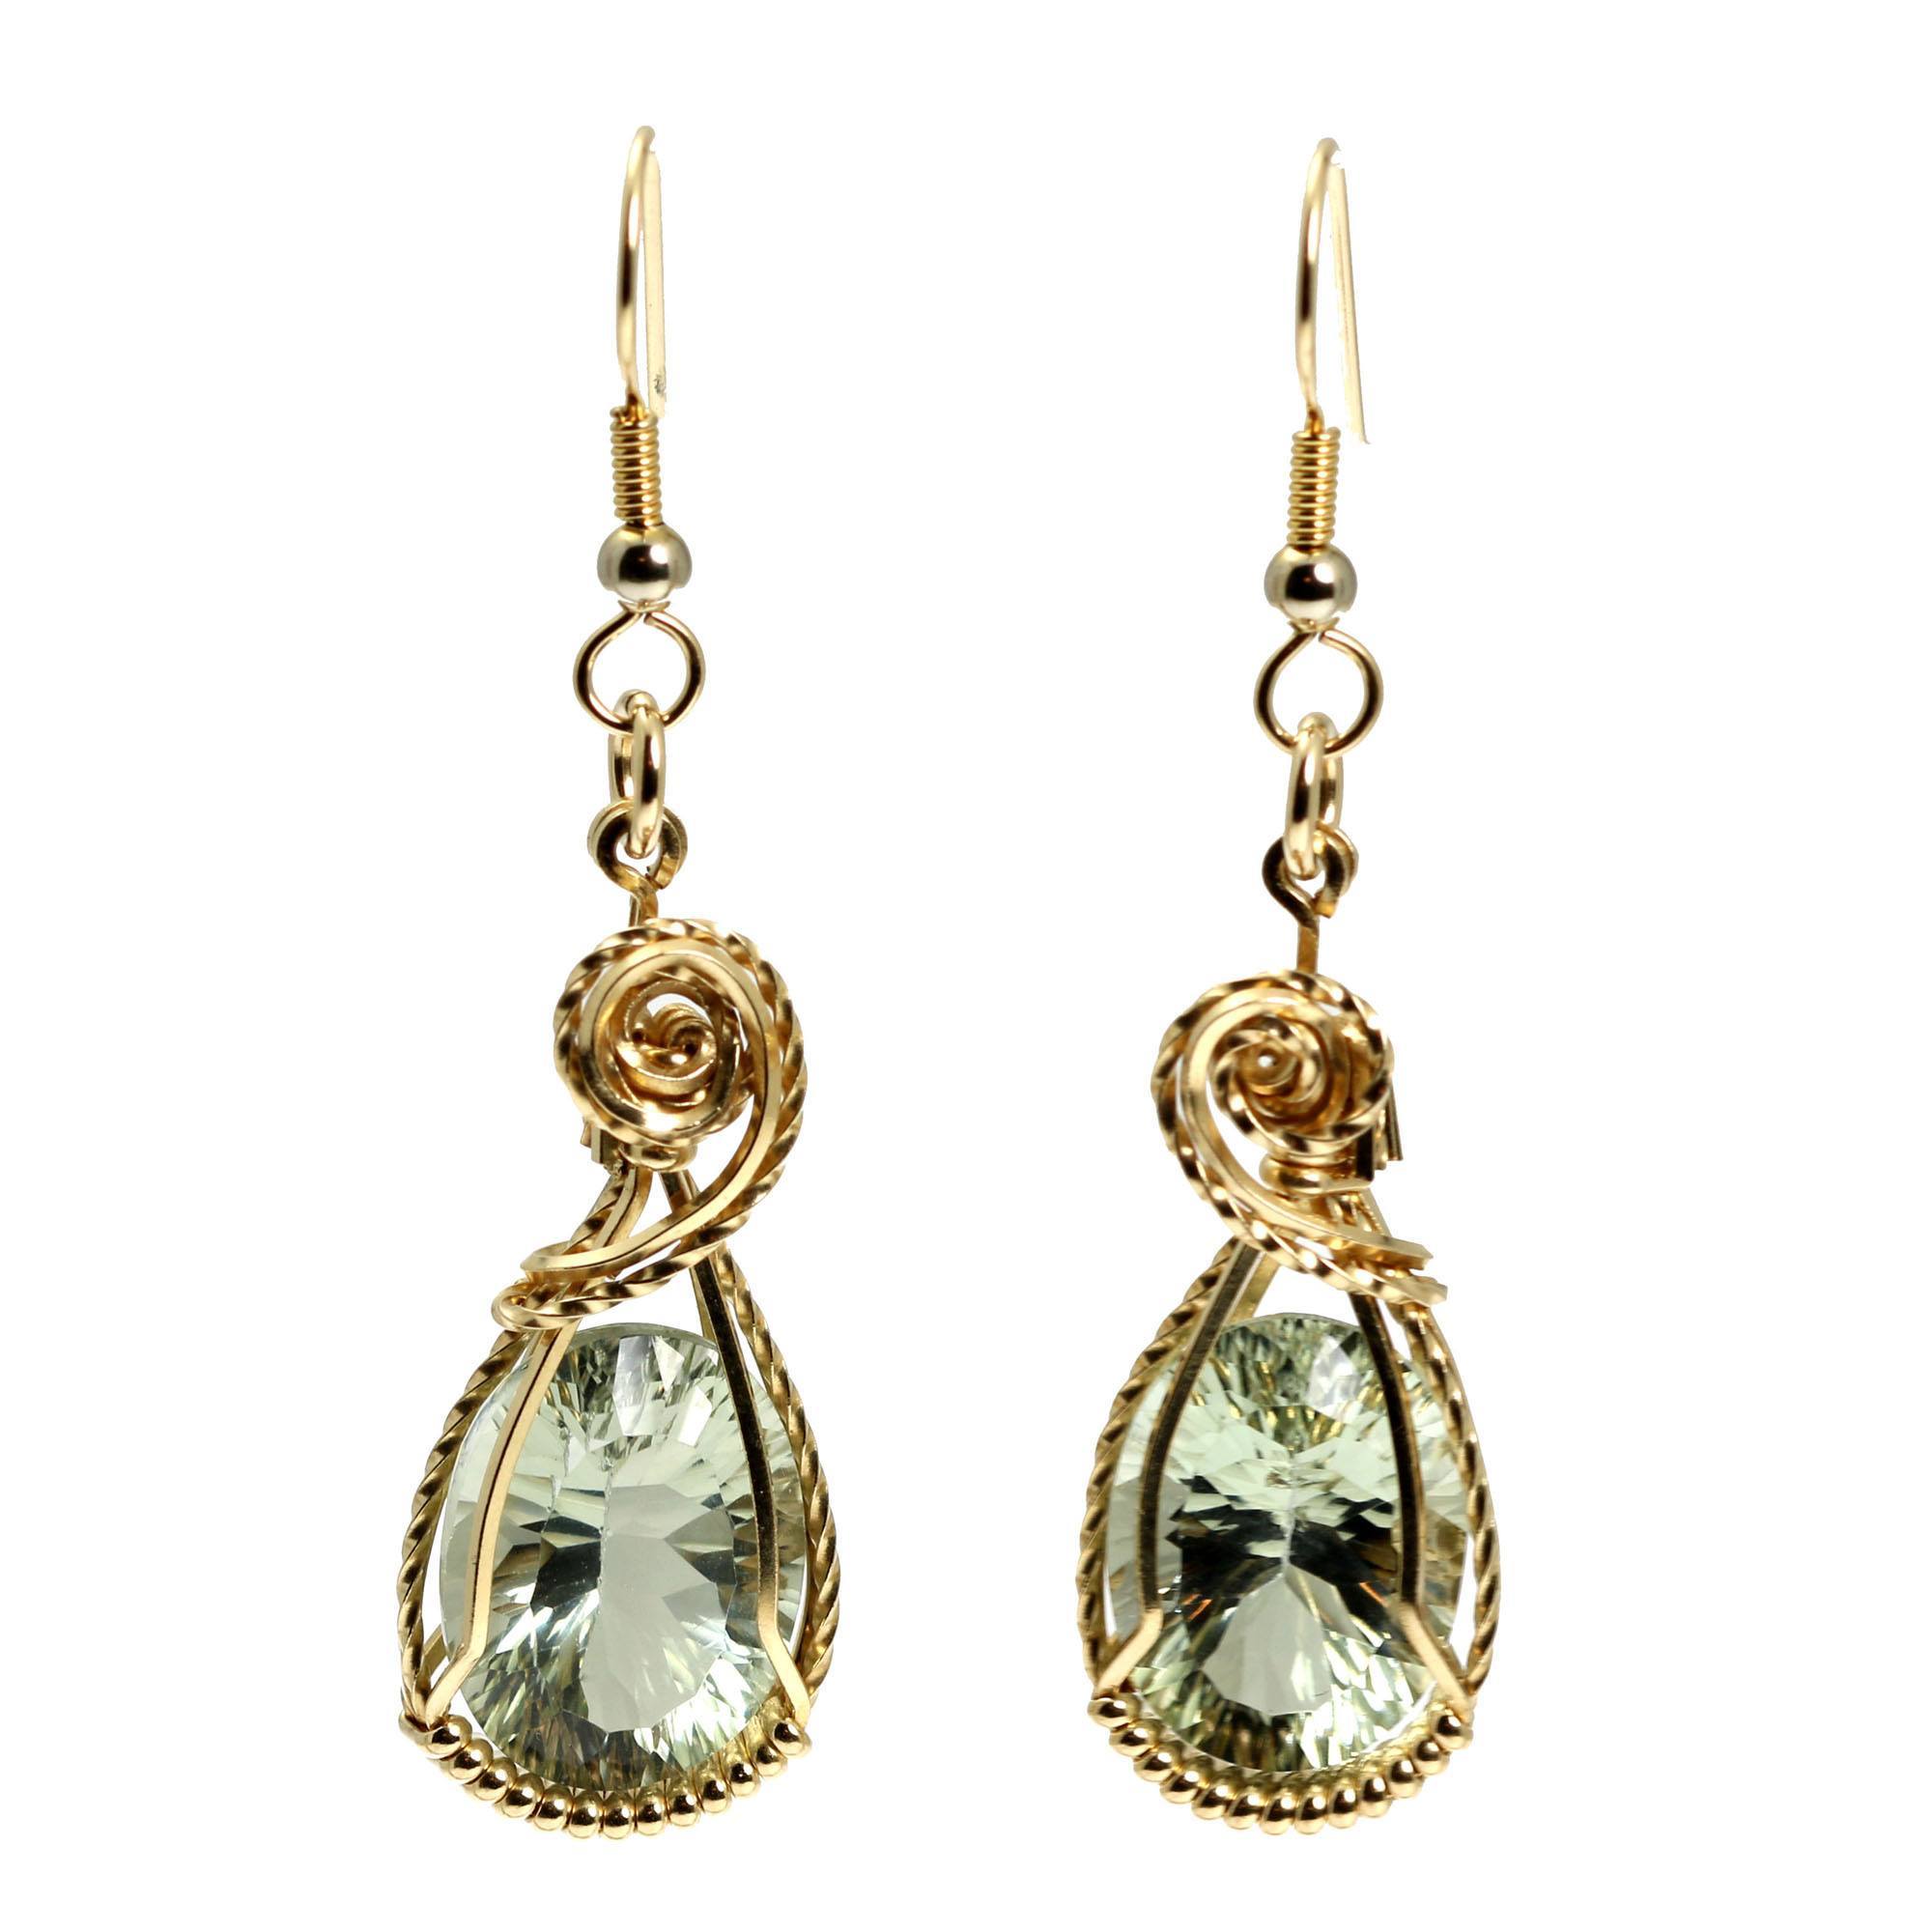 Green Amethyst 14K Gold-filled Earrings Close Up View